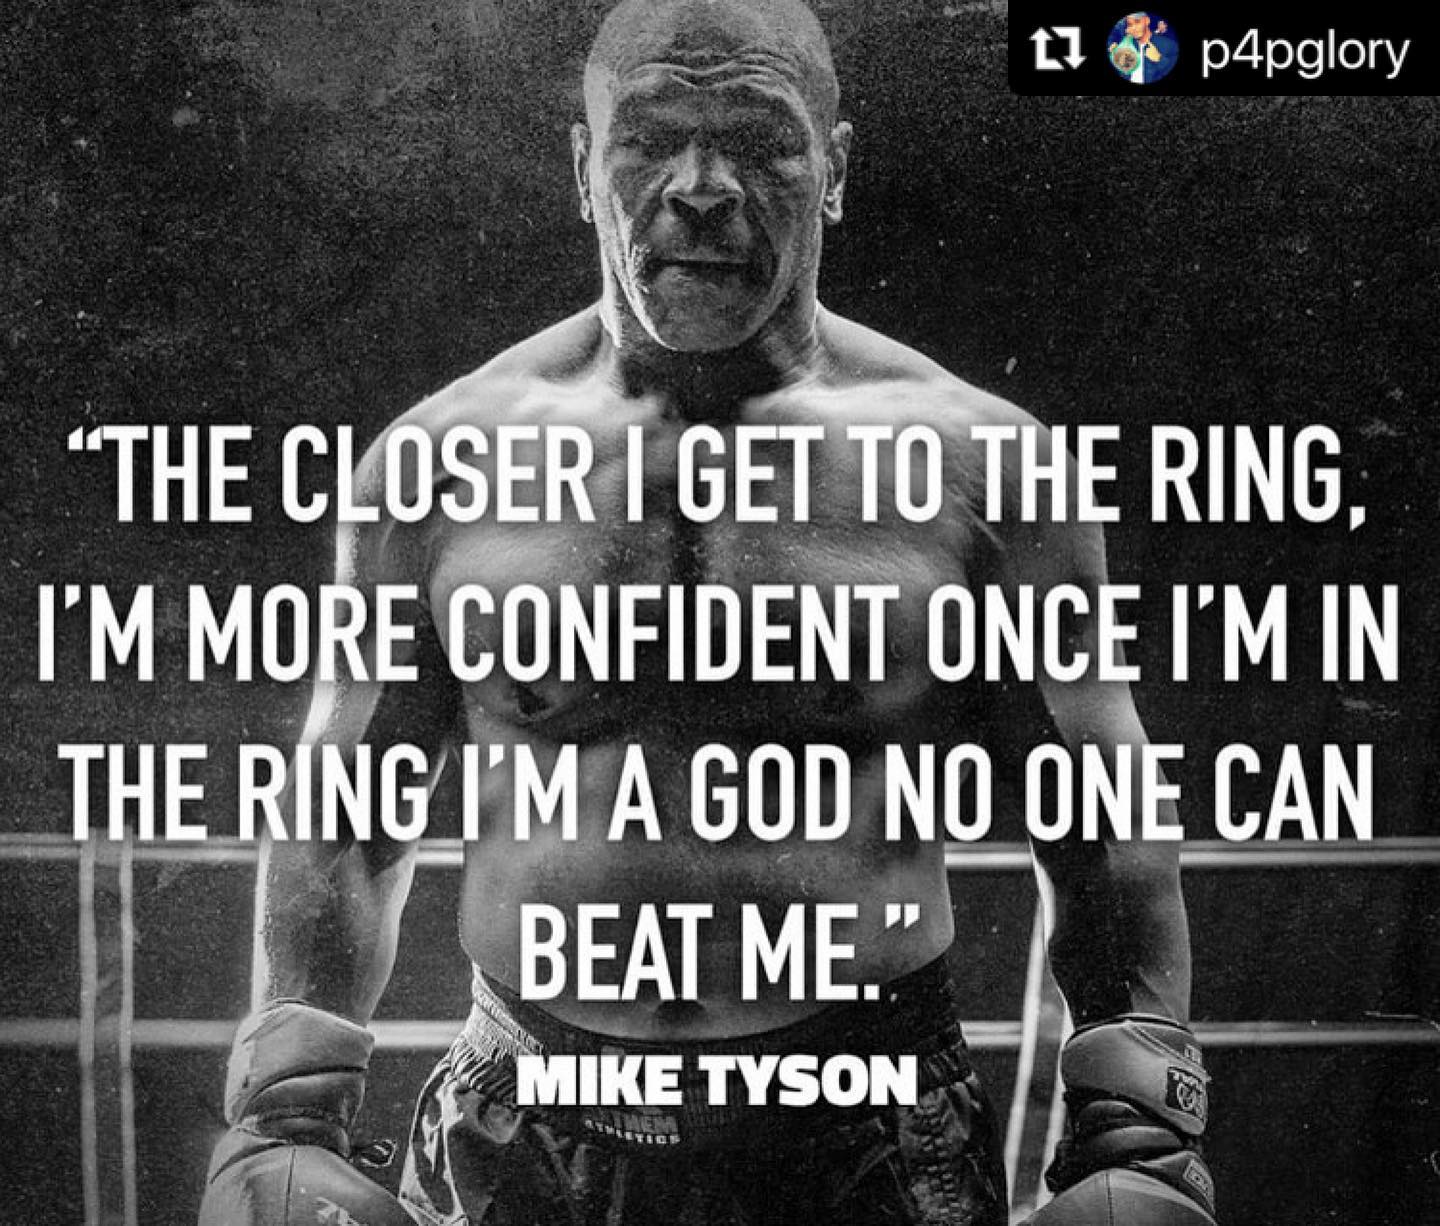 Confidence - Is One of the most important things our boxing trainer @tommymcinerney focuses on building with his clients . 
.
@miketyson